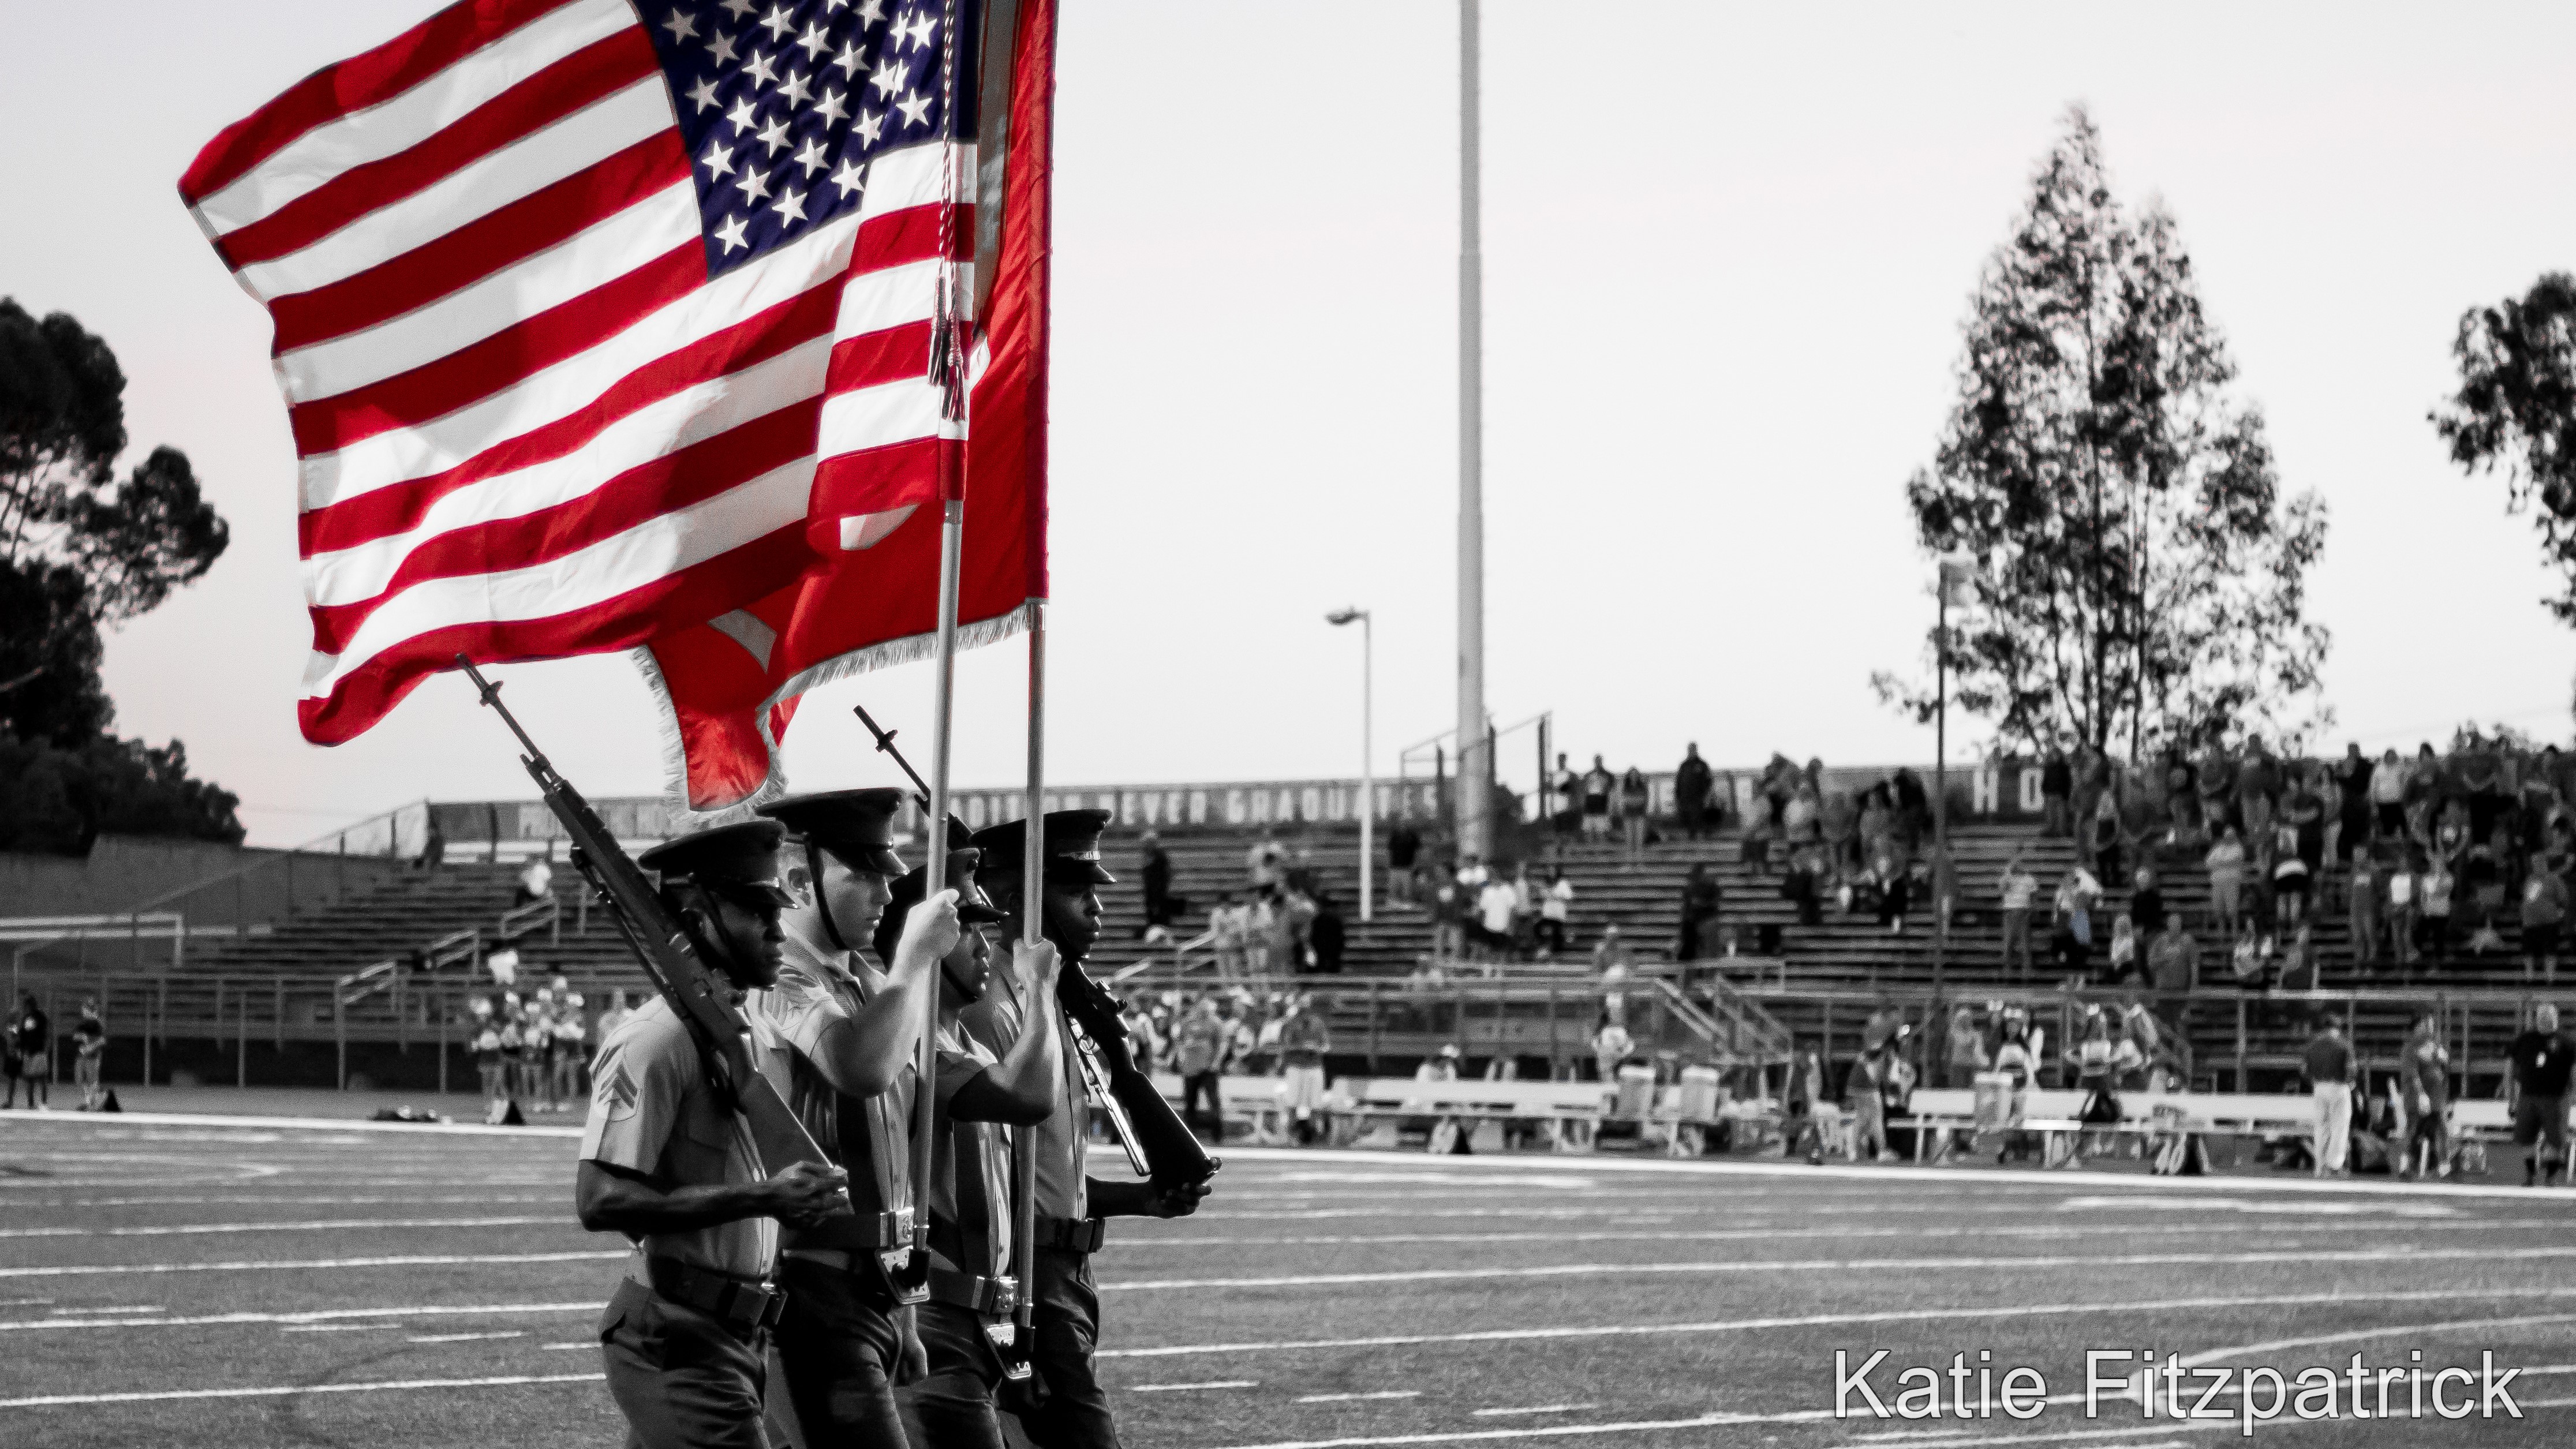 mission armed forces football game